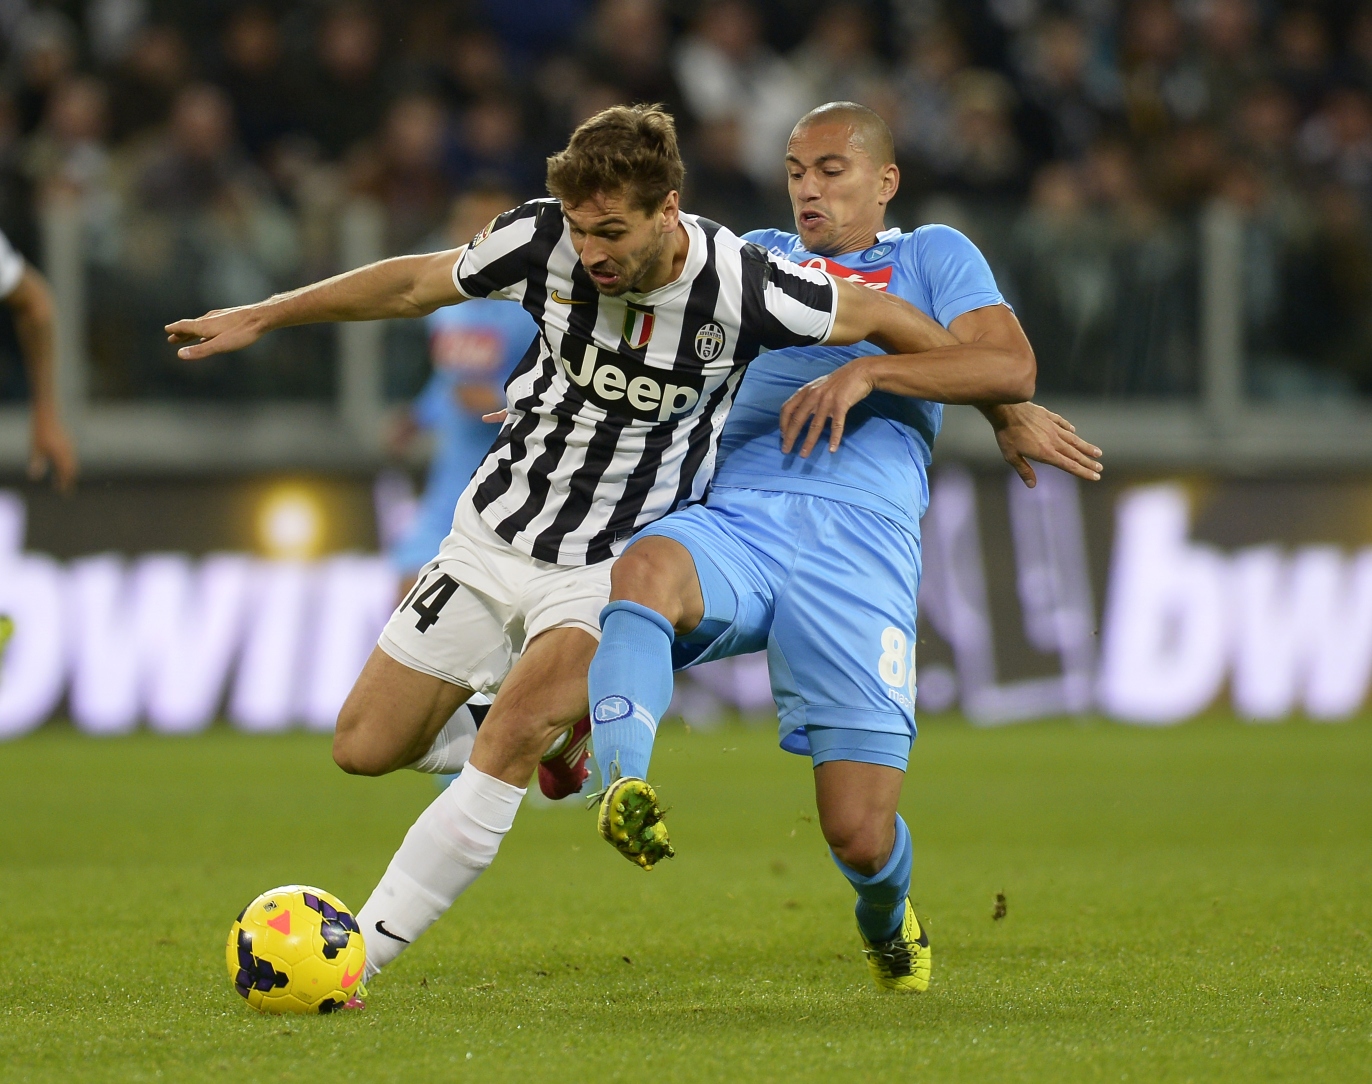 Juventus' Fernando Torres Llorente during the match against Napoli in Turin in Italy. Photo: Xinhua